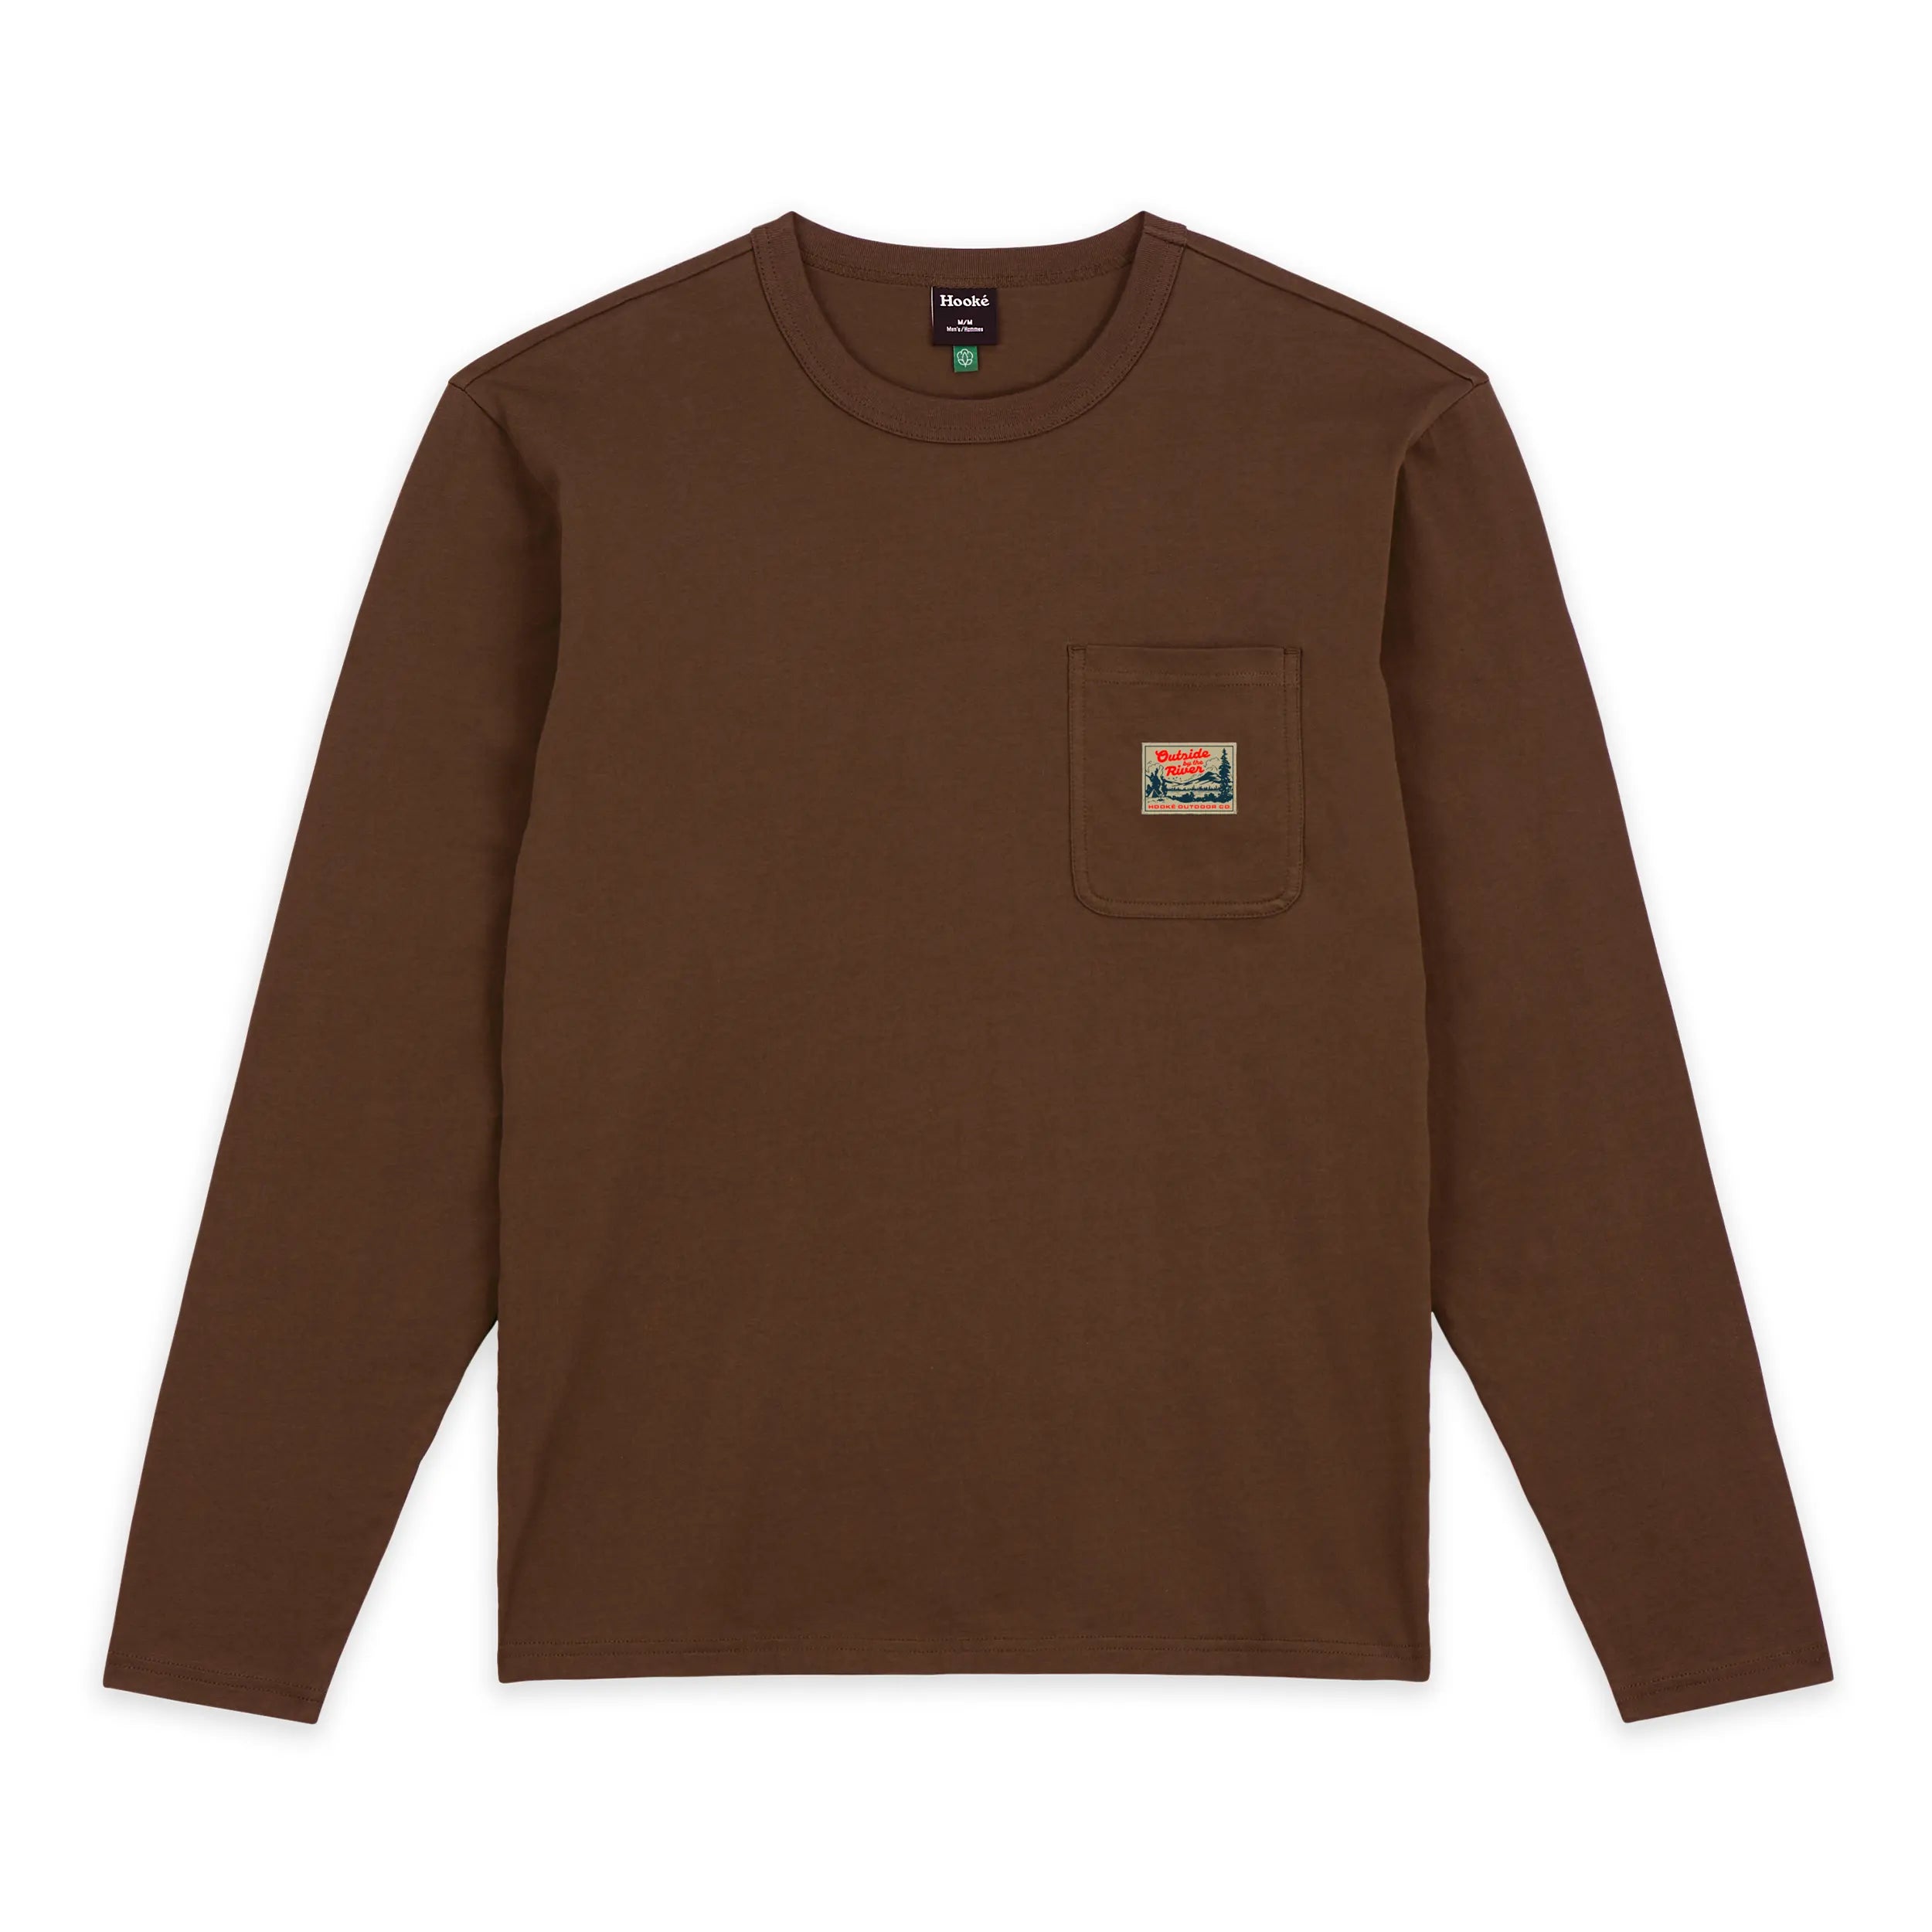 M's Outside by the River Long Sleeve Pocket Tee